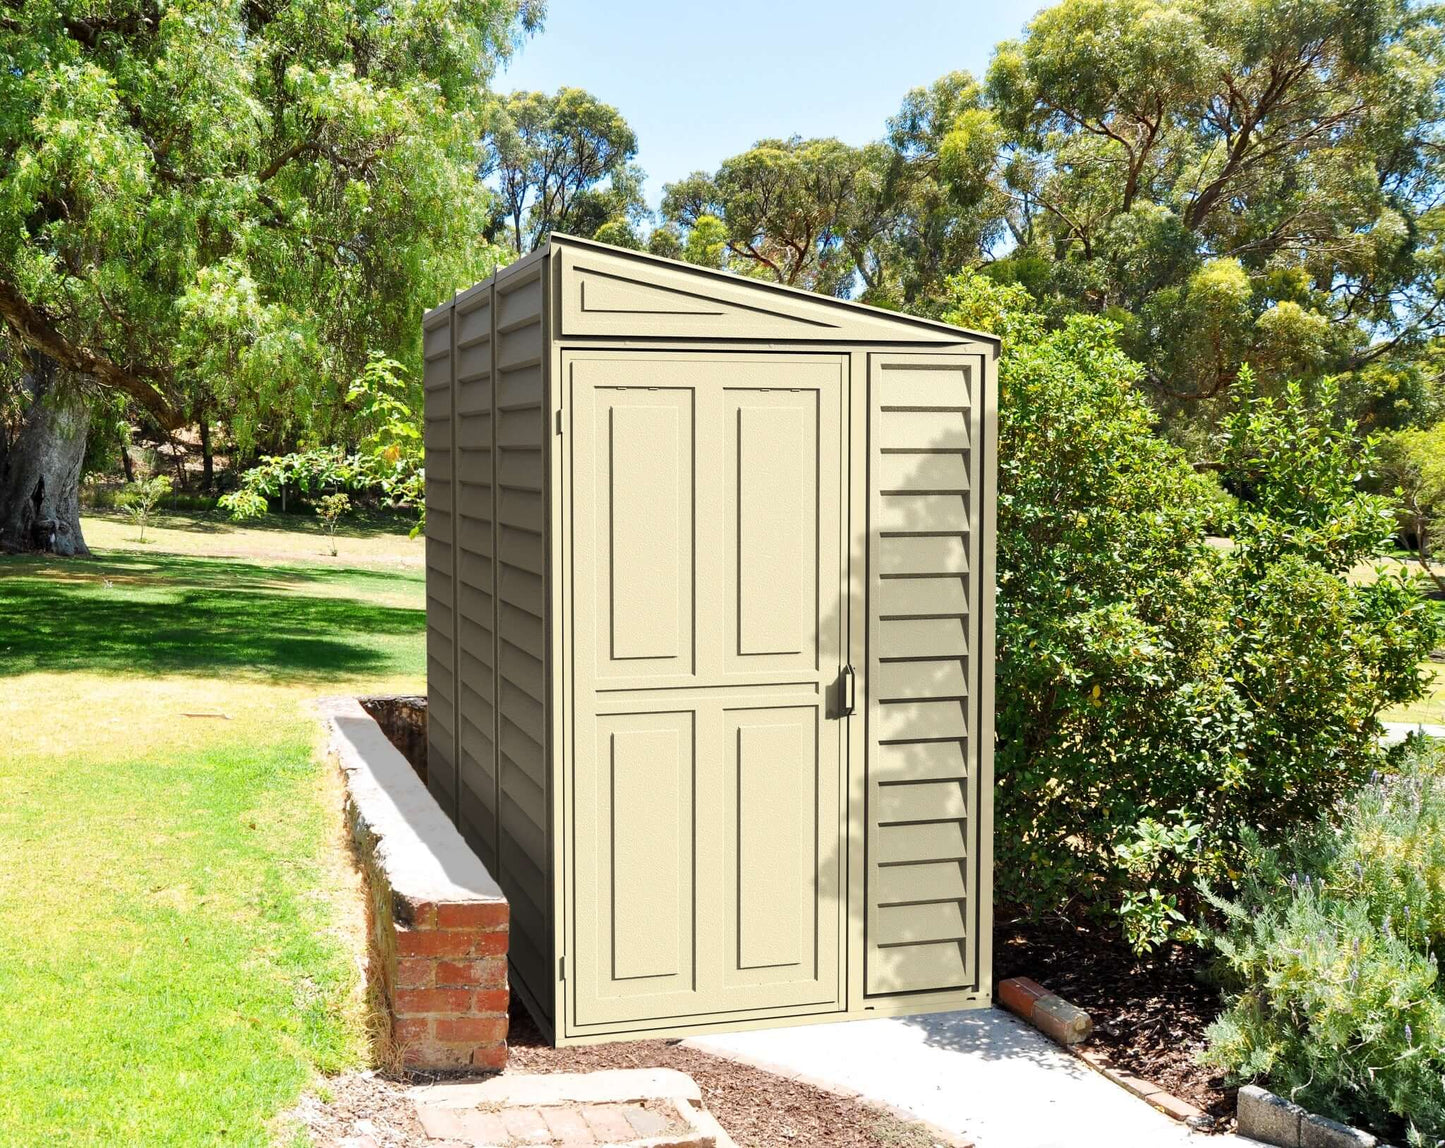 Duramax 4' x 8' SideMate Shed with Foundation 06625 outside in yard